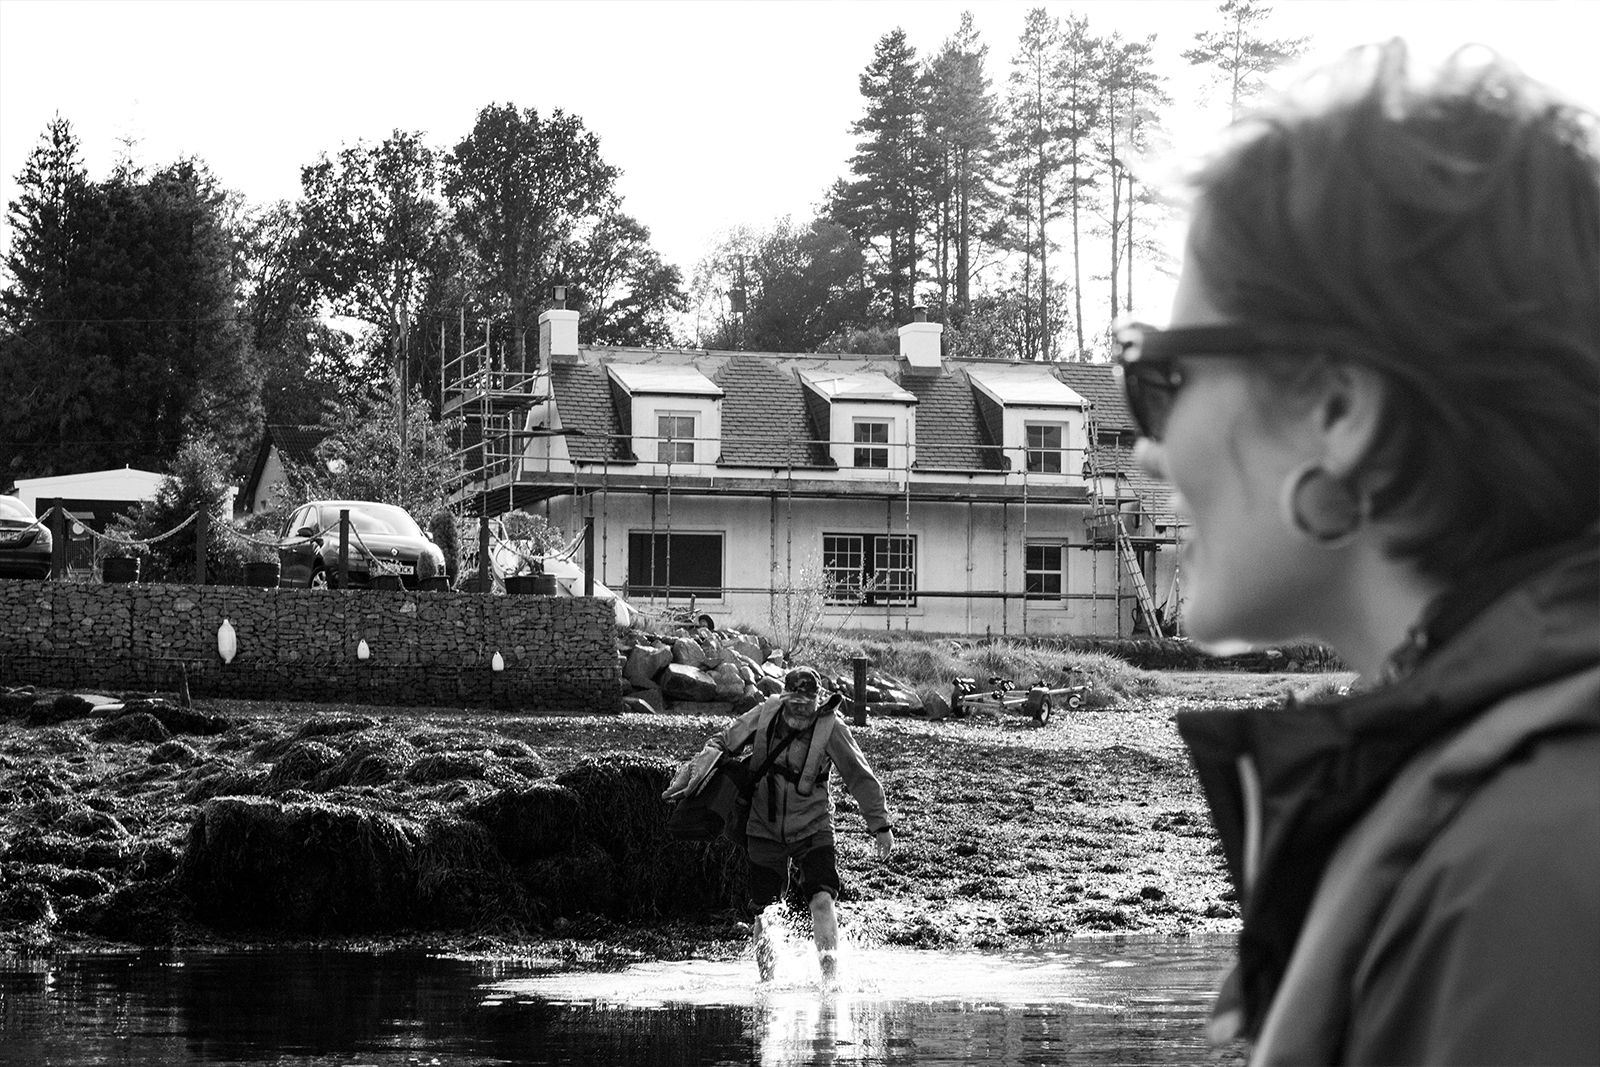 Loch Fyne 2019 O Street Fishing Trip. Graphic designer Tessa Simpson is in the foreground, out of focus with Neil Wallace wading into the loch in the background.